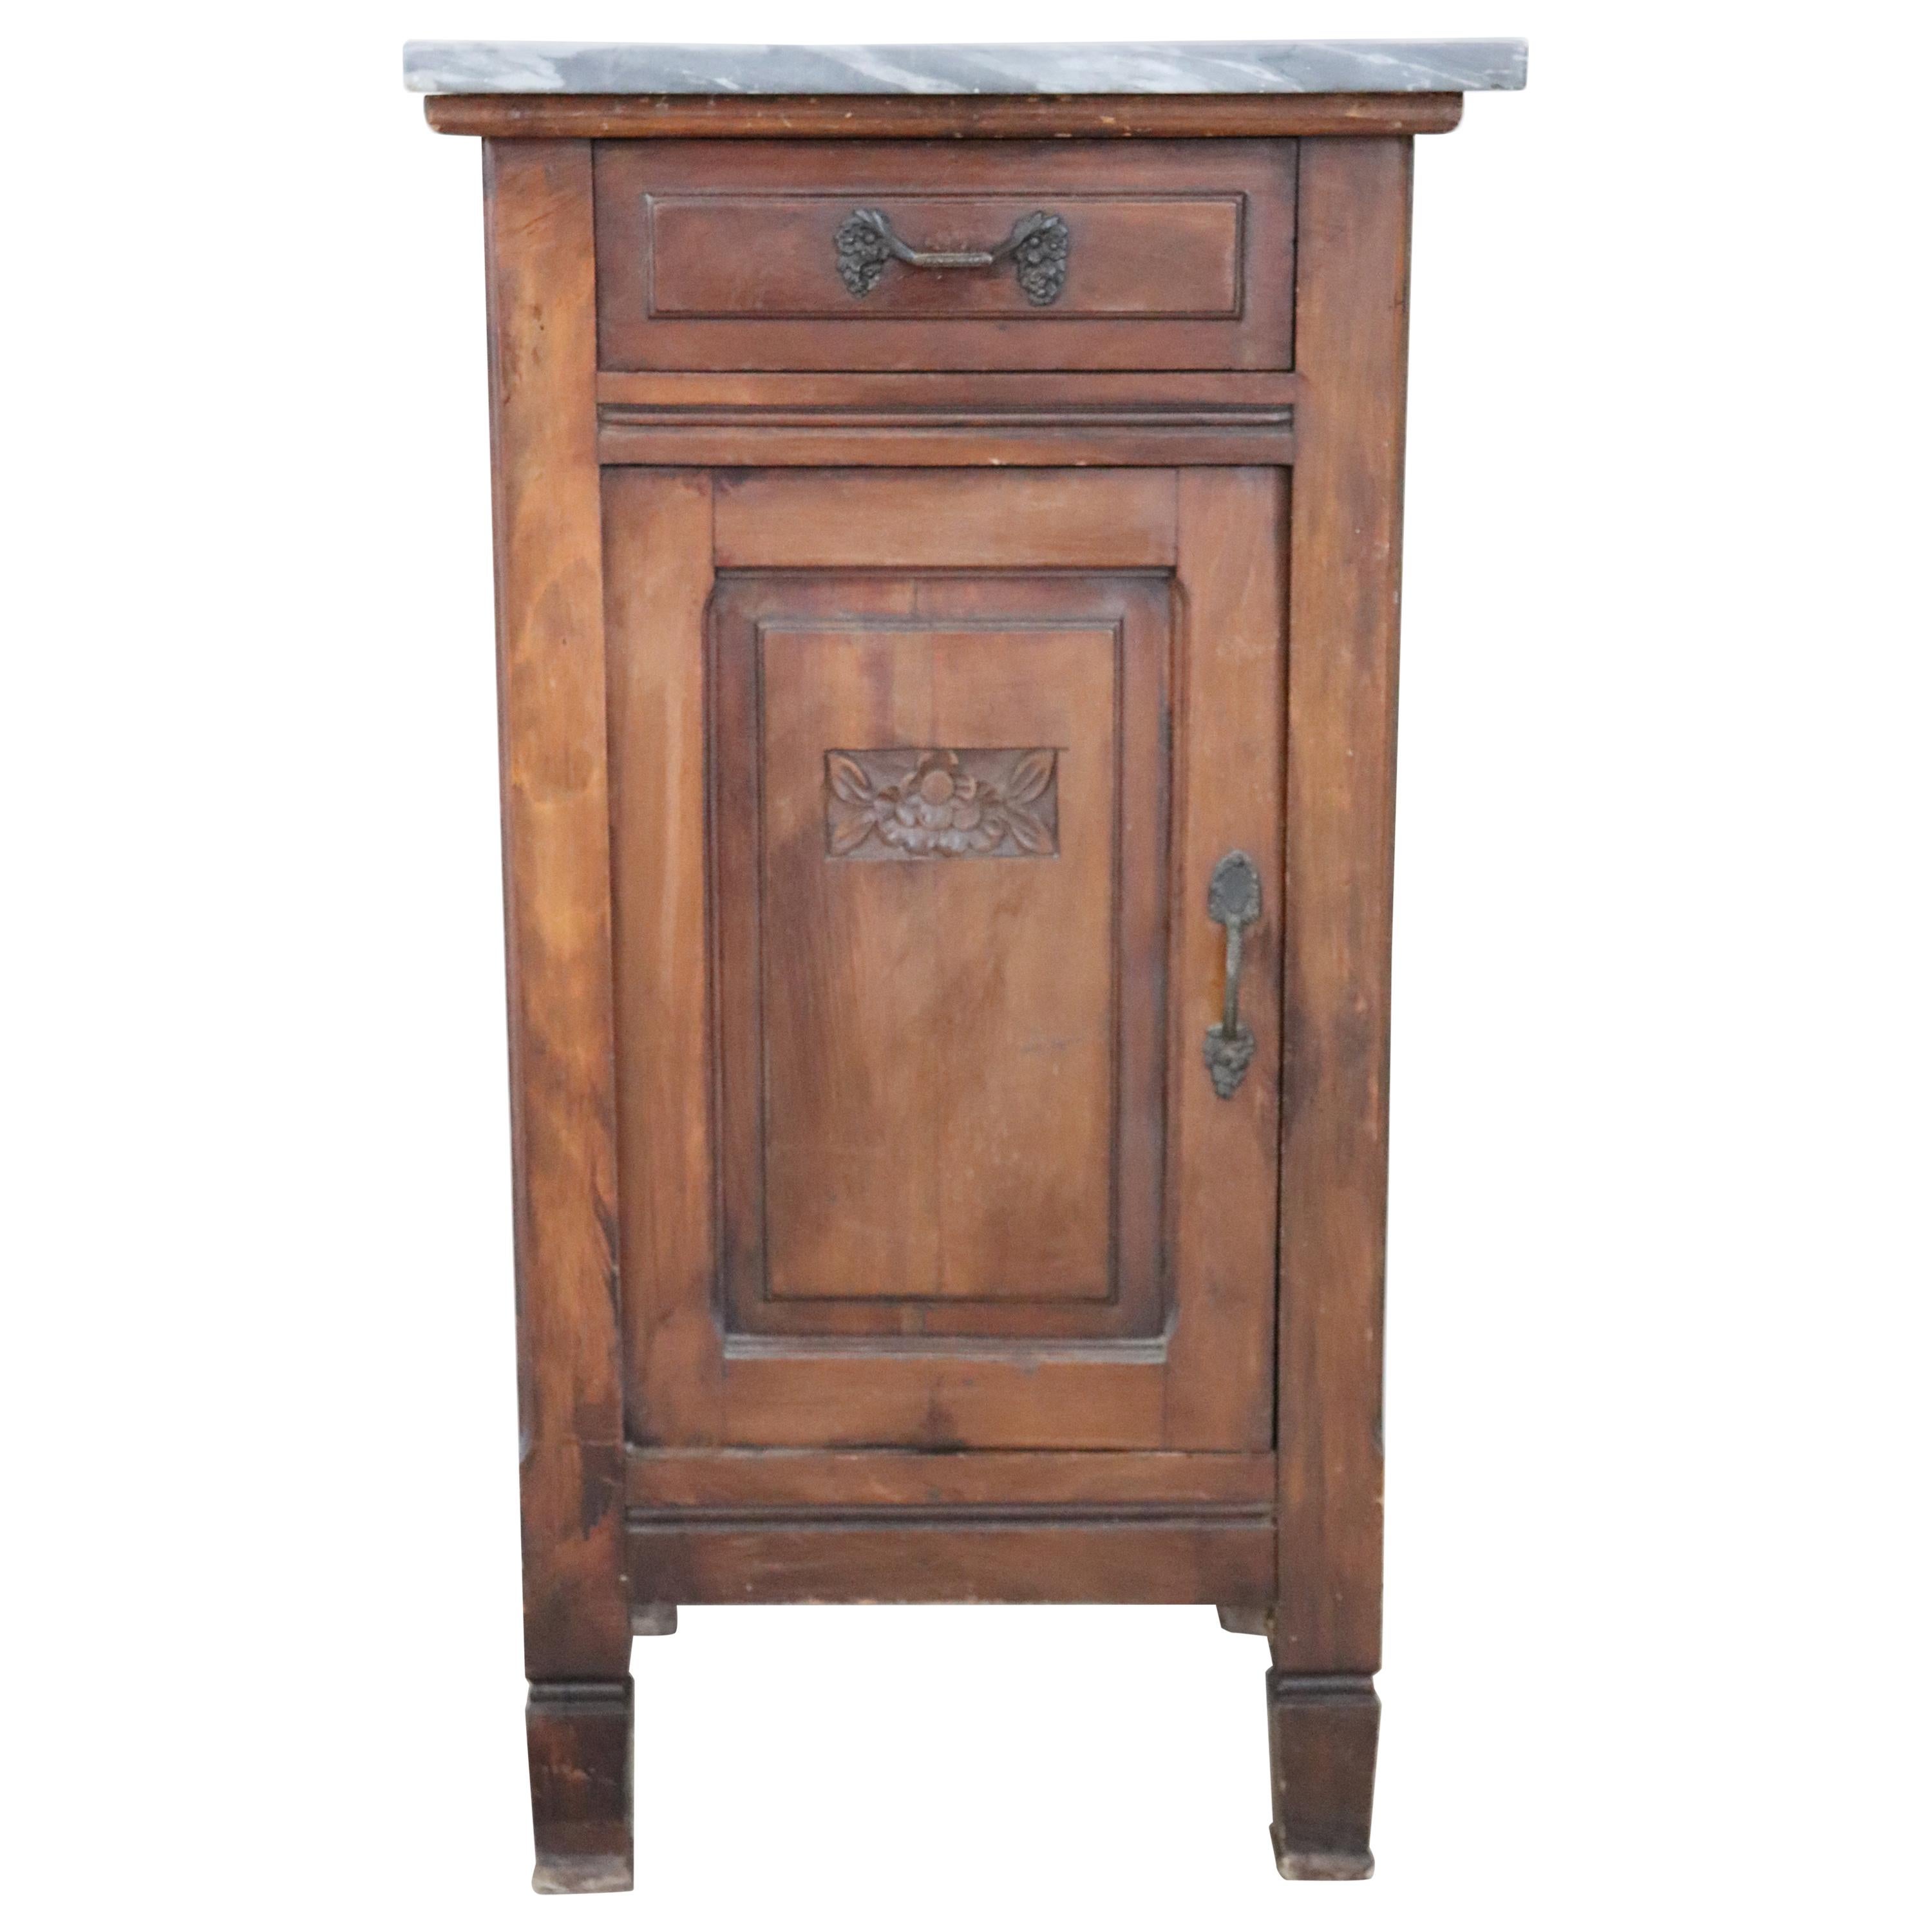 20th Century Italian Antique Cherry Wood Nightstand with Marble Top